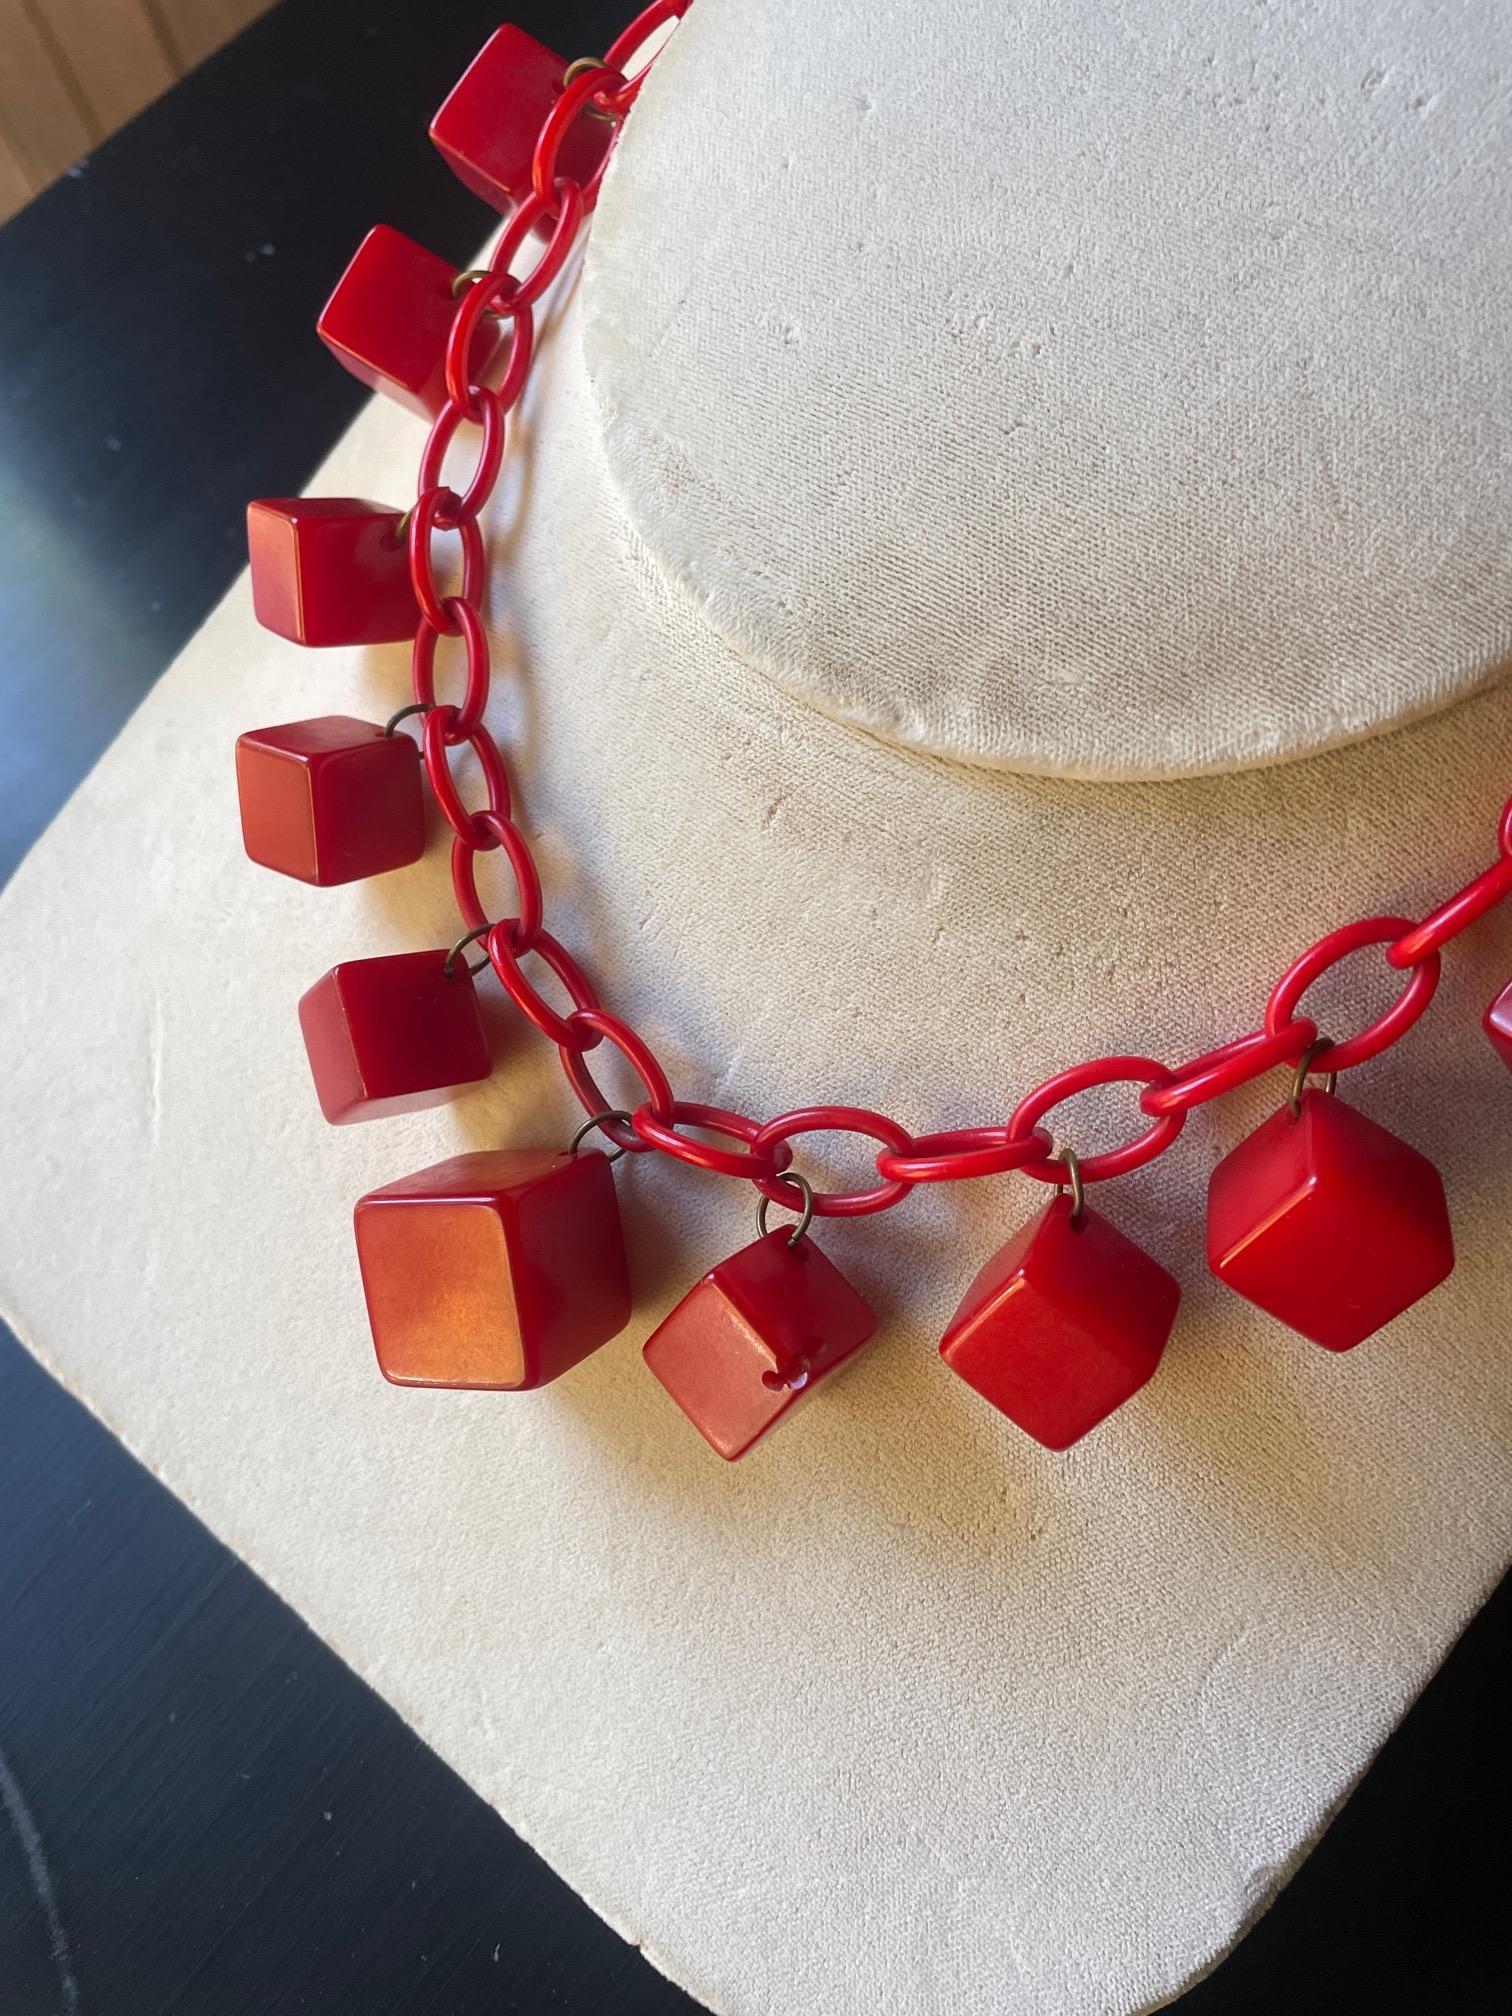 Antique Bakelite Nº11 Cubist NYC Art Deco Cherry Red Charm Necklace  In Fair Condition For Sale In Hyattsville, MD